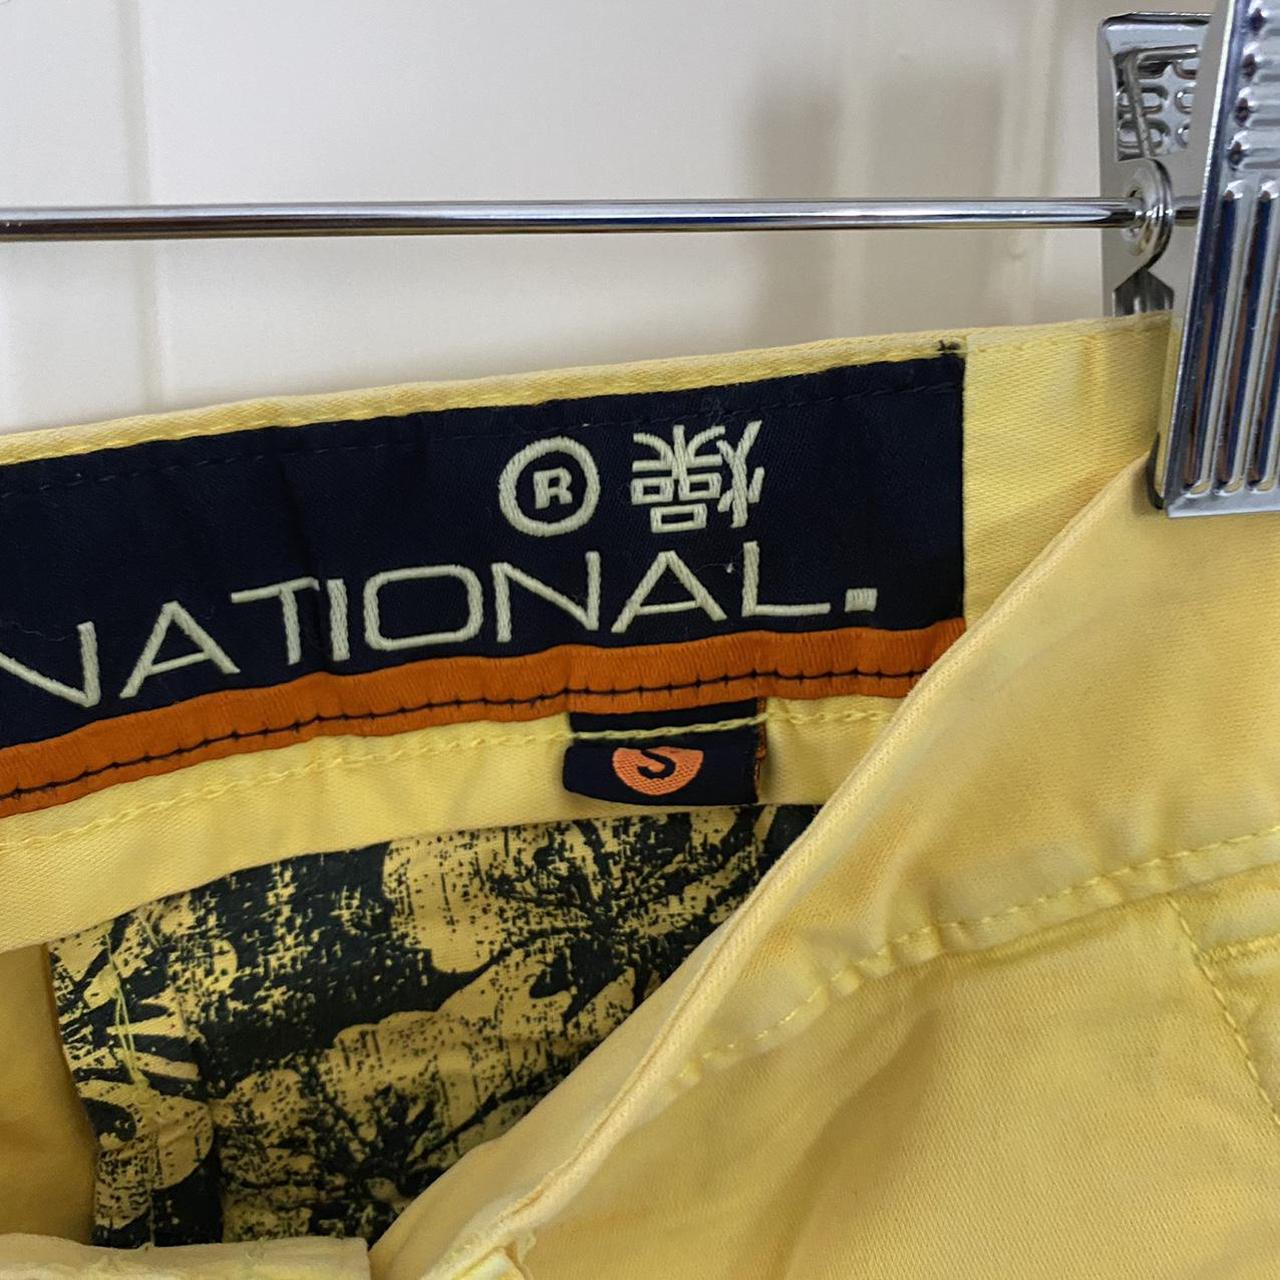 Product Image 3 - Men’s Superdry international shorts

Yellow

Size small

#superdry